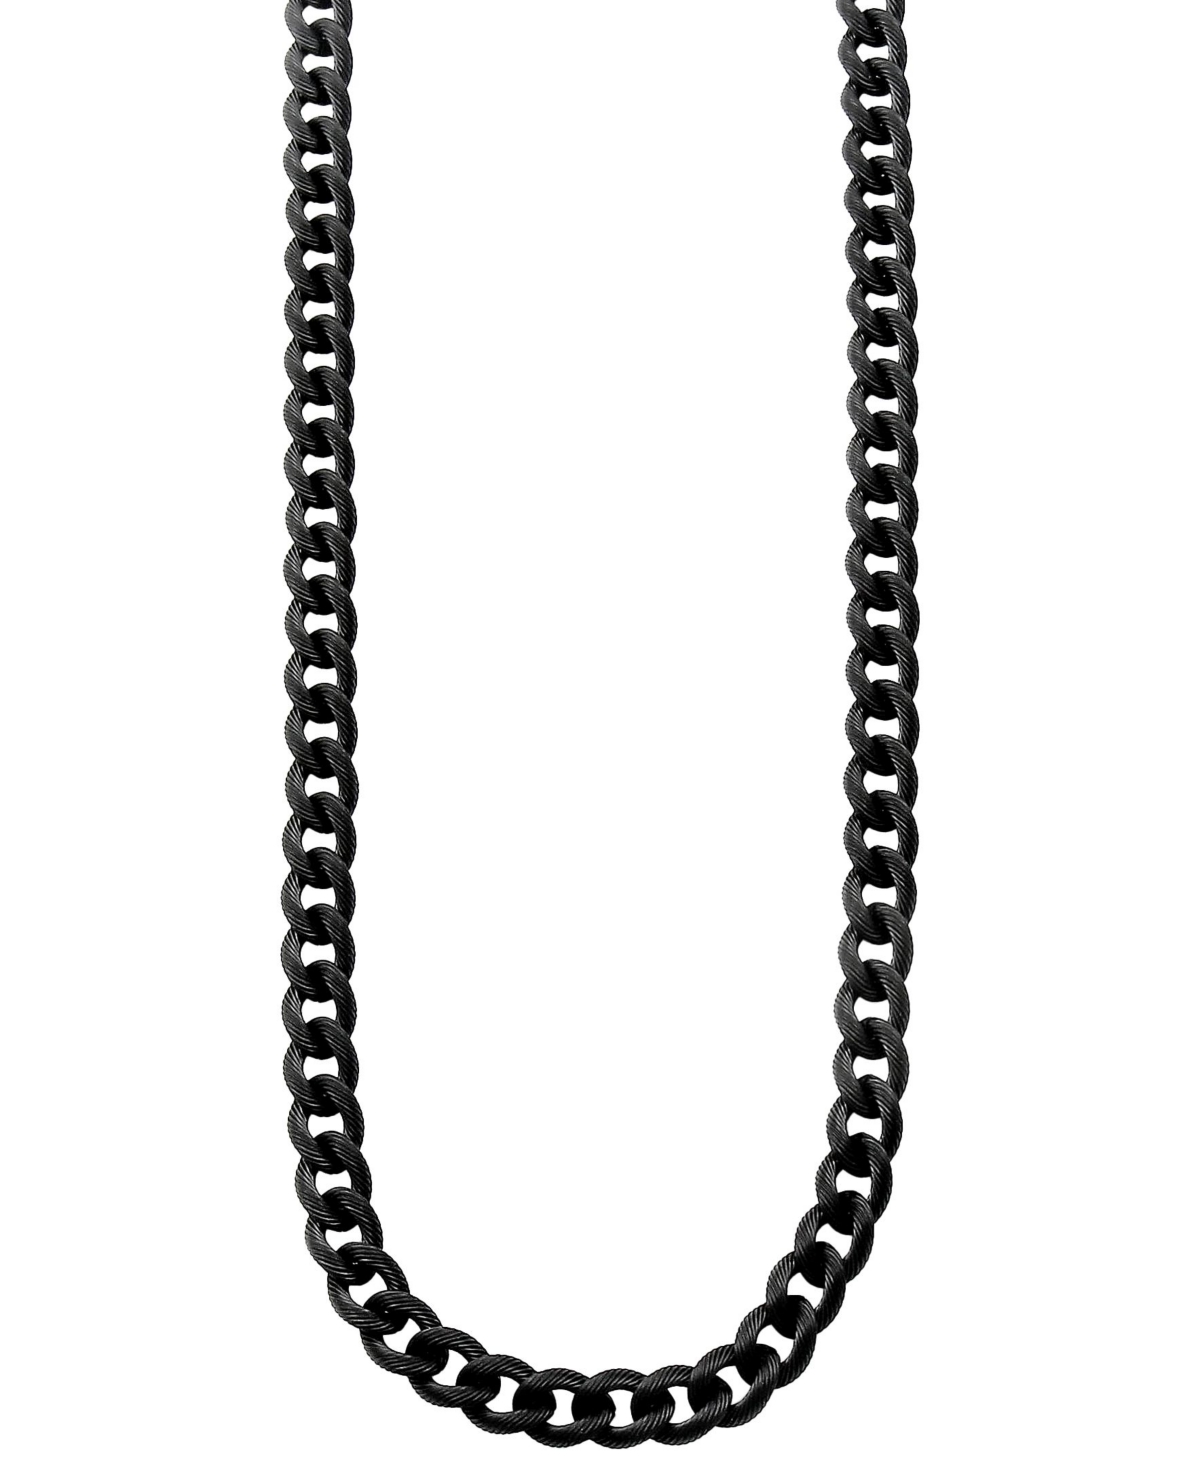 Sutton Stainless Steel Black Curb Link Chain Necklace - Black